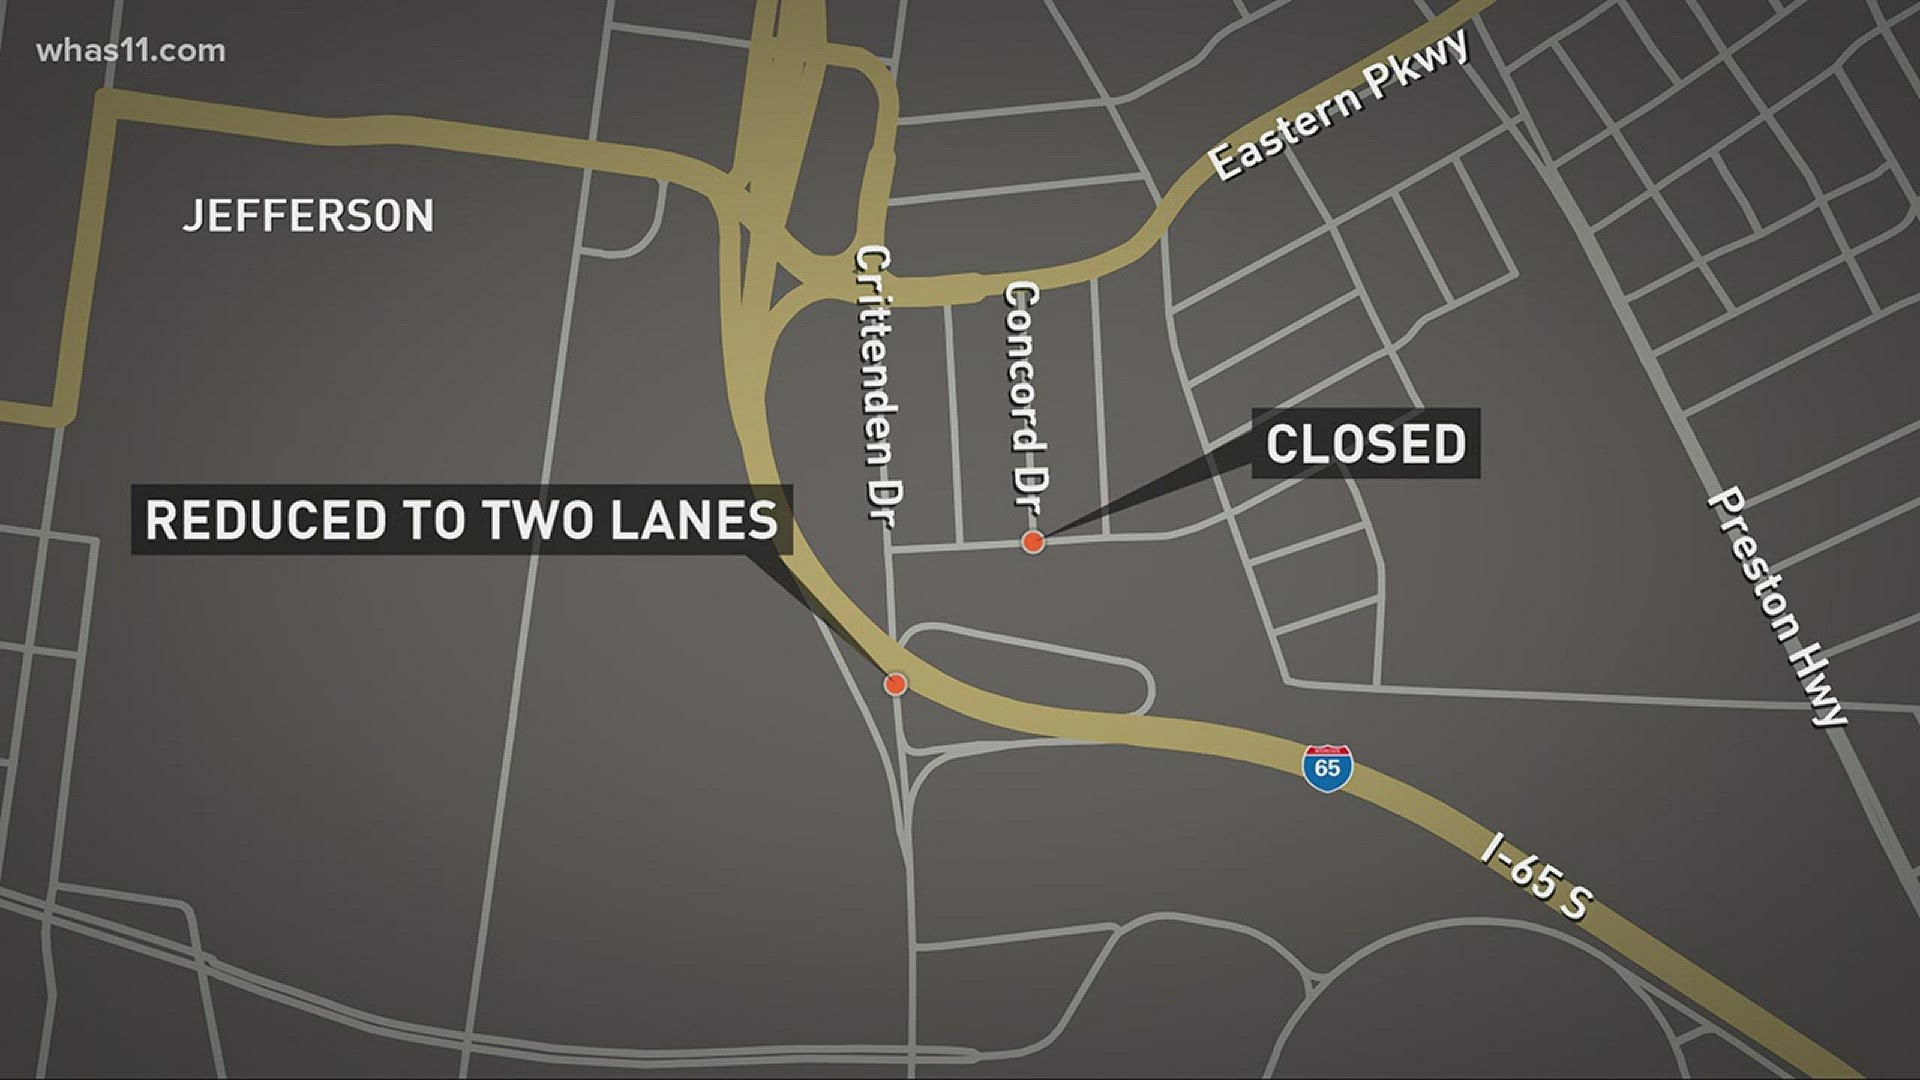 Lane closures due to Eastern Pkwy. project